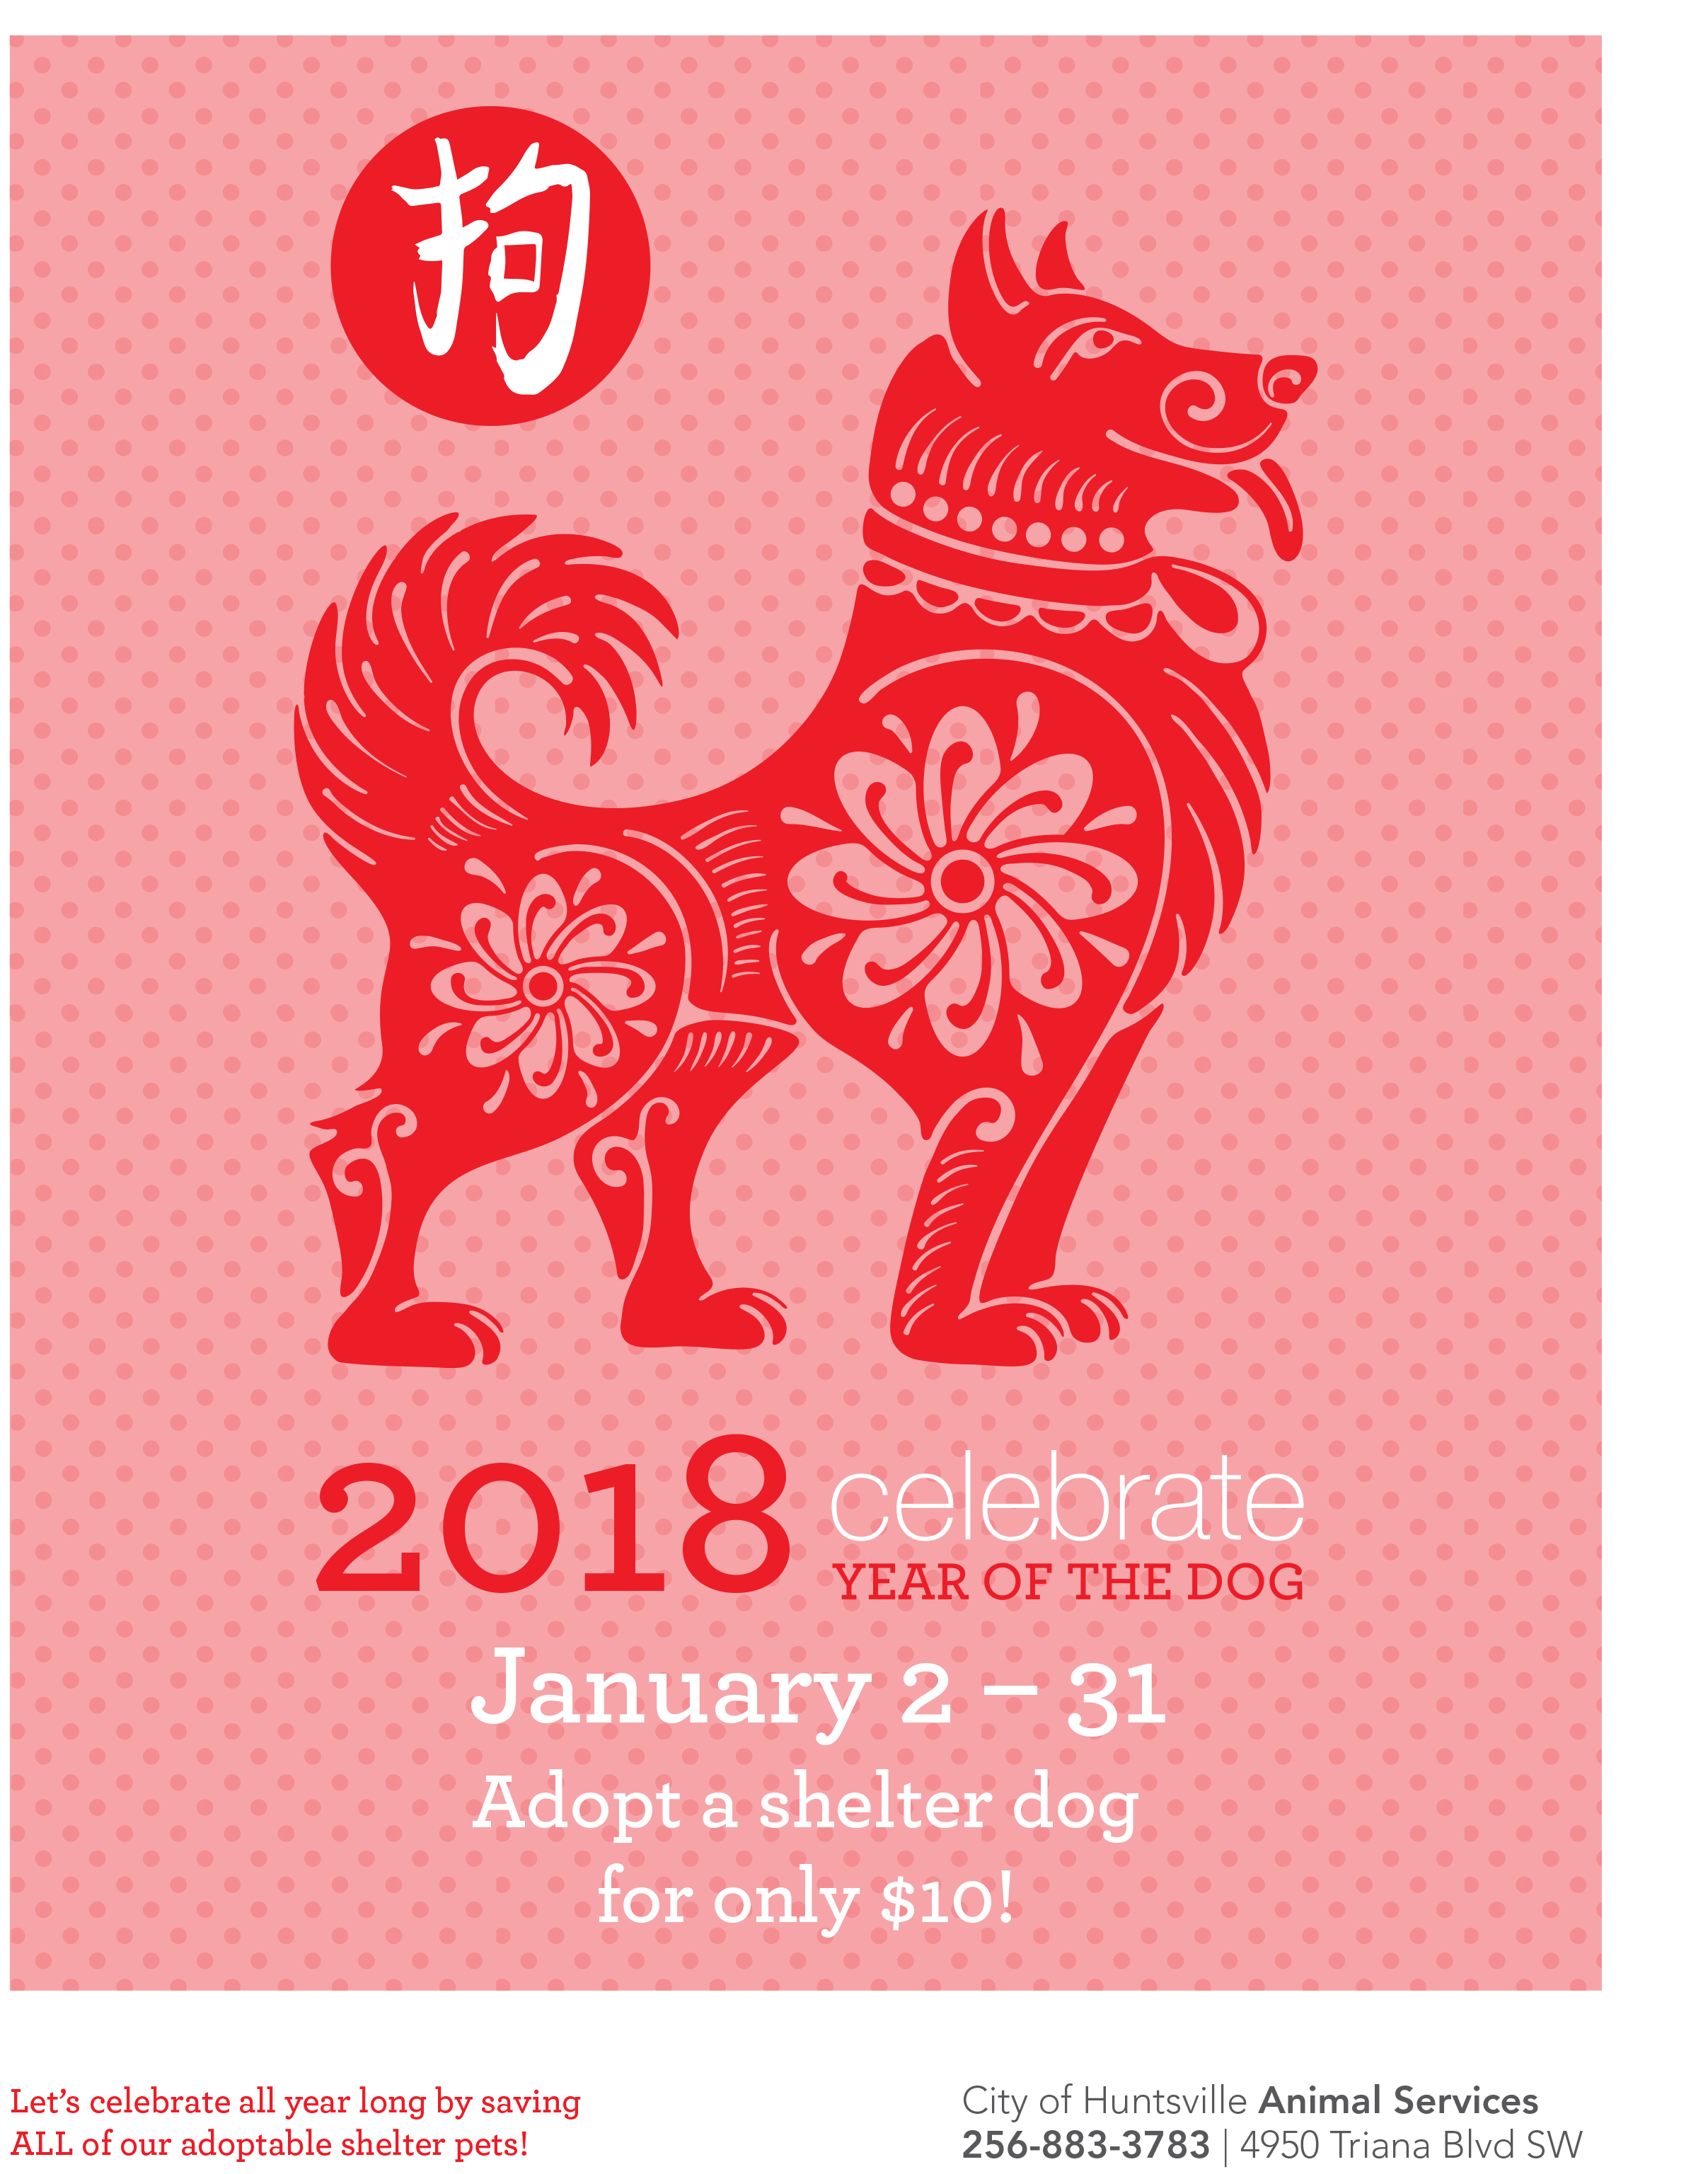 Animal Shelter Celebrates the Year of the Dog with $10 Adoption Special -  City of Huntsville